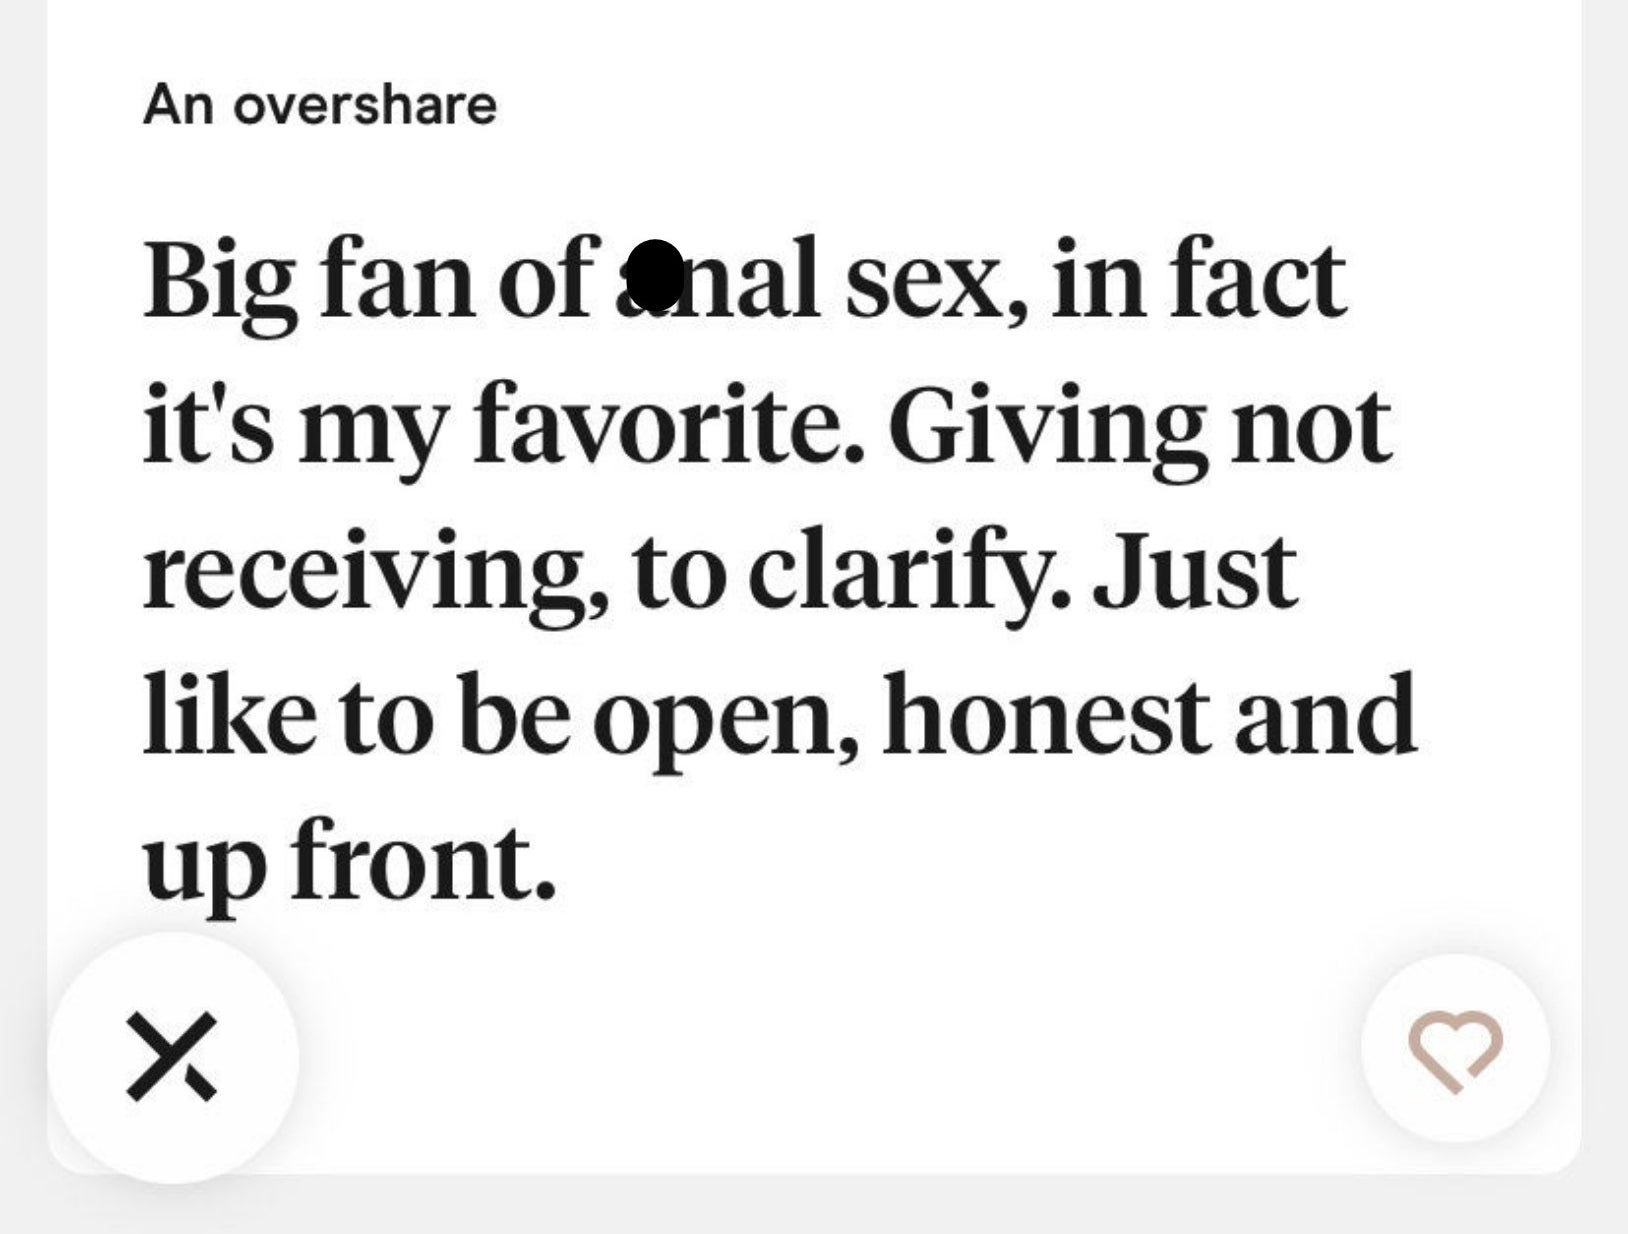 big fan of anal sex, giving not receiving to clarify